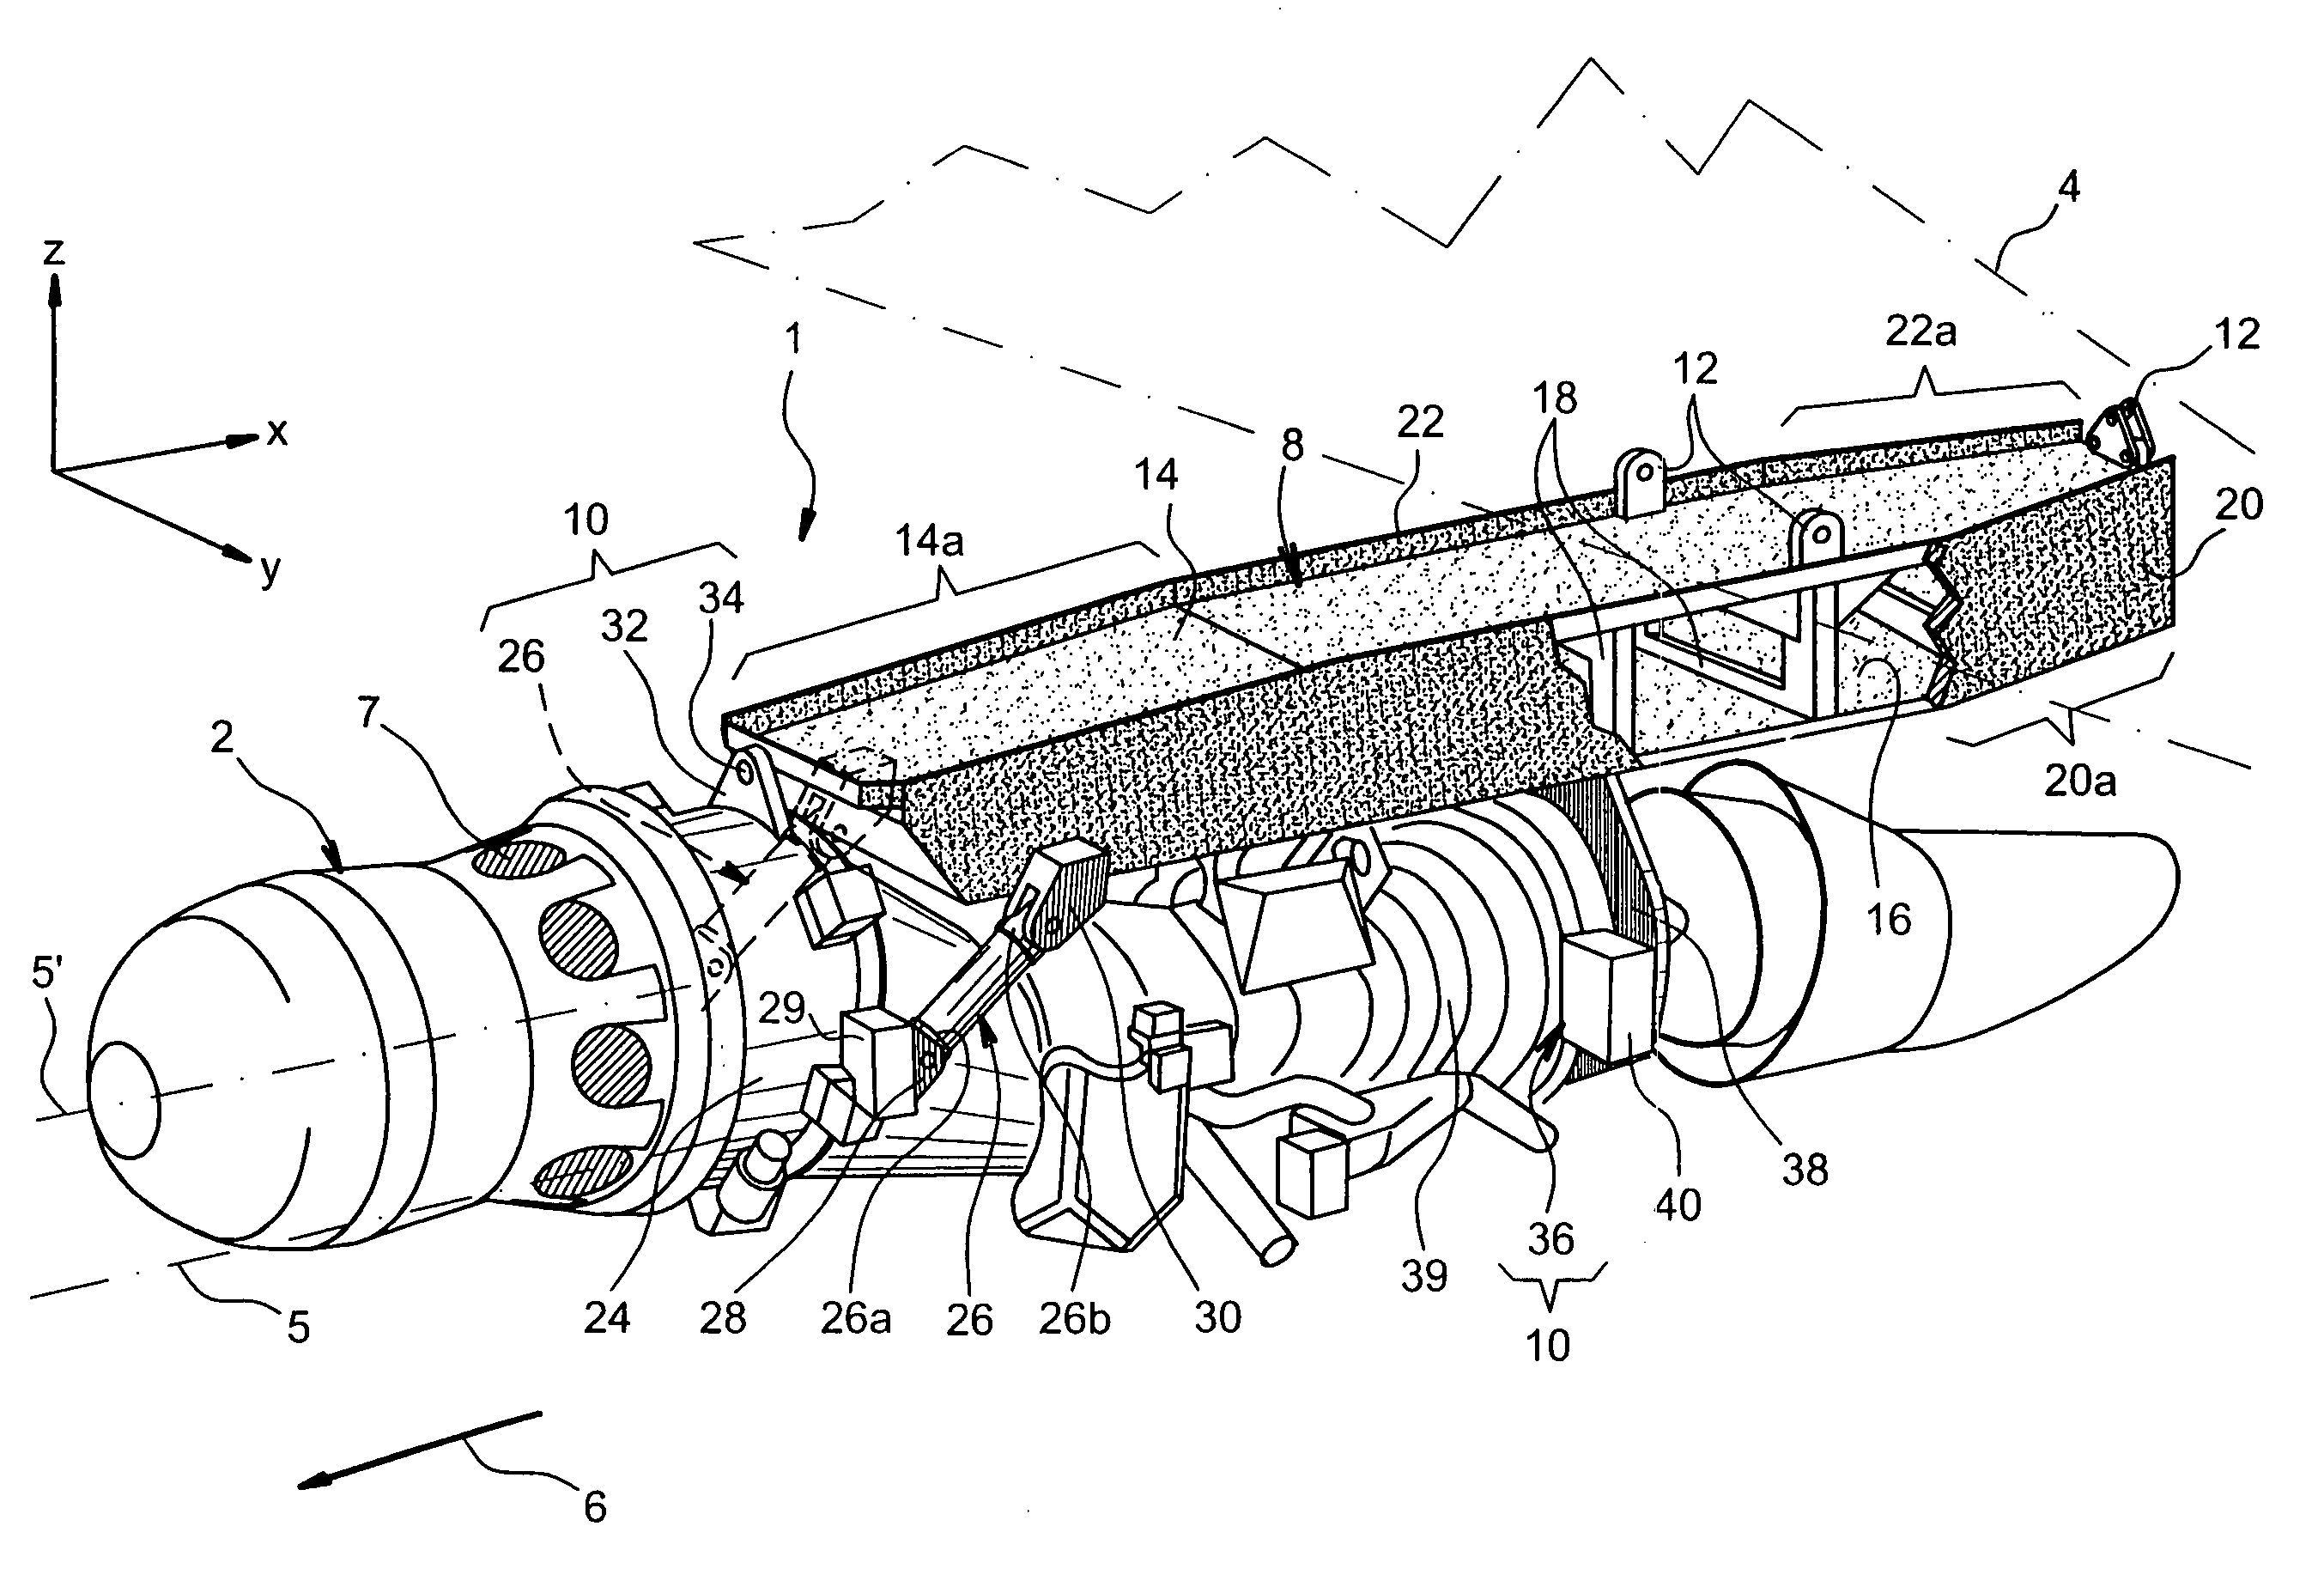 Structure for mounting a turboprop under an aircraft wing